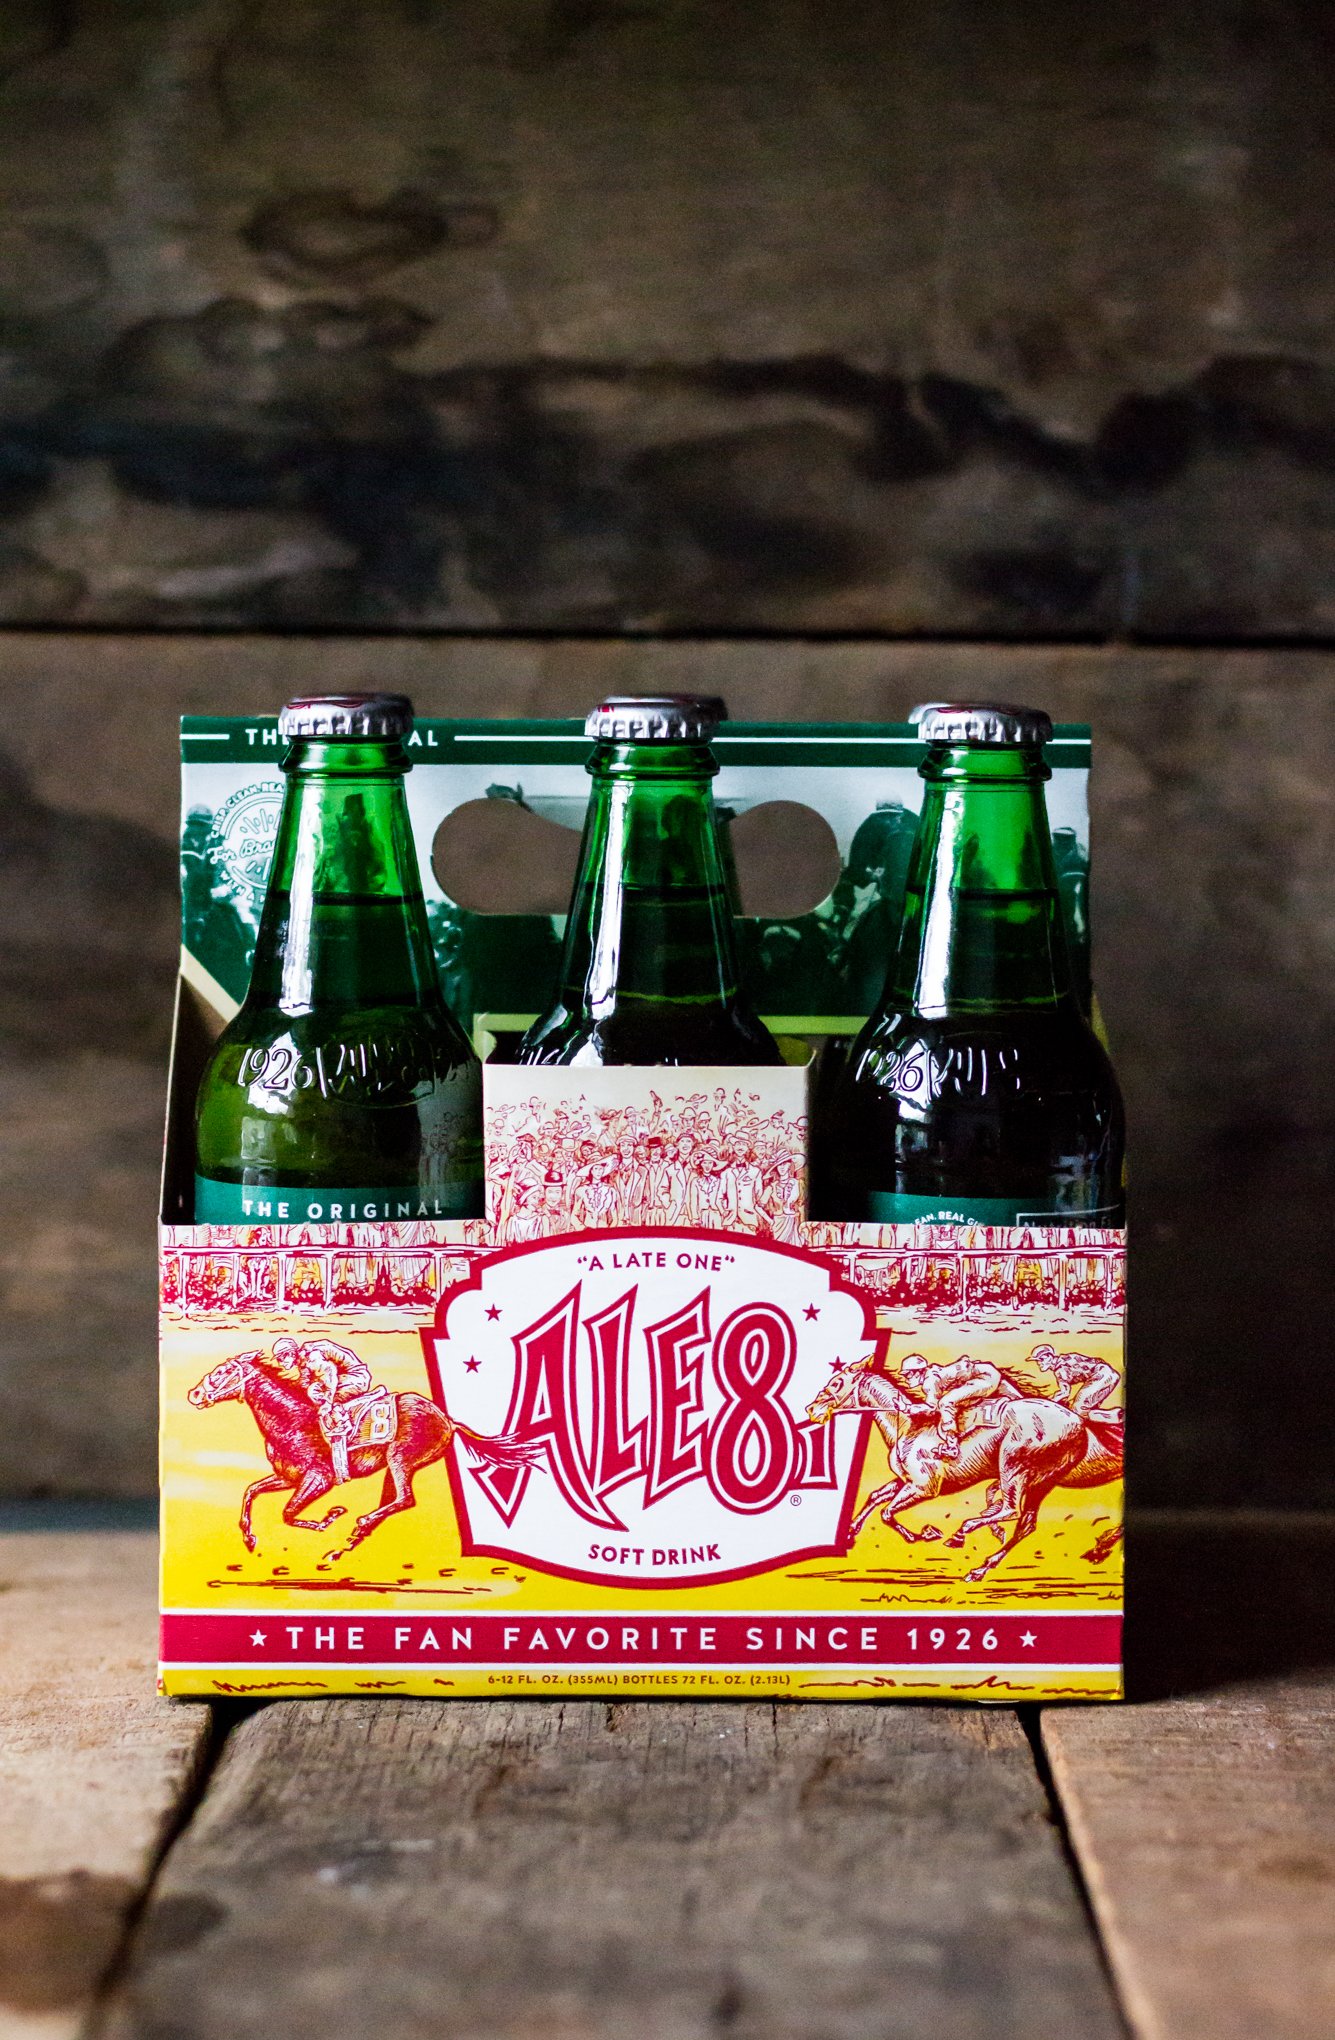 ale8one, jubli8, derby cocktails, the kentucky gent, the kentucky derby